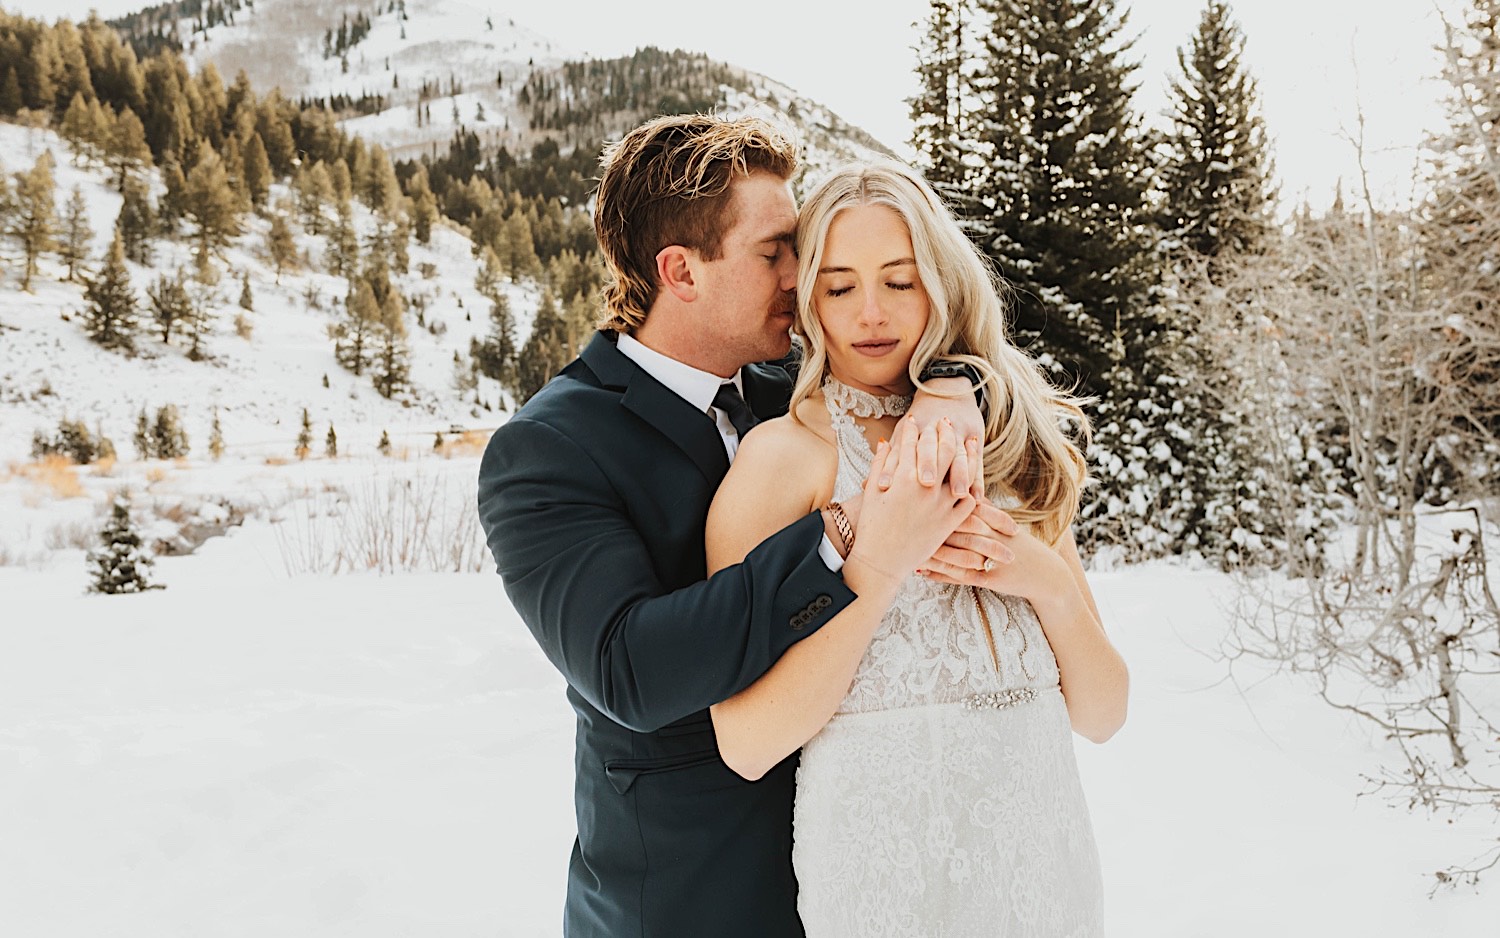 In a snow covered forest in a mountain near Salt Lake City a bride closes her eyes while a groom stands behind her and is about to kiss her cheek